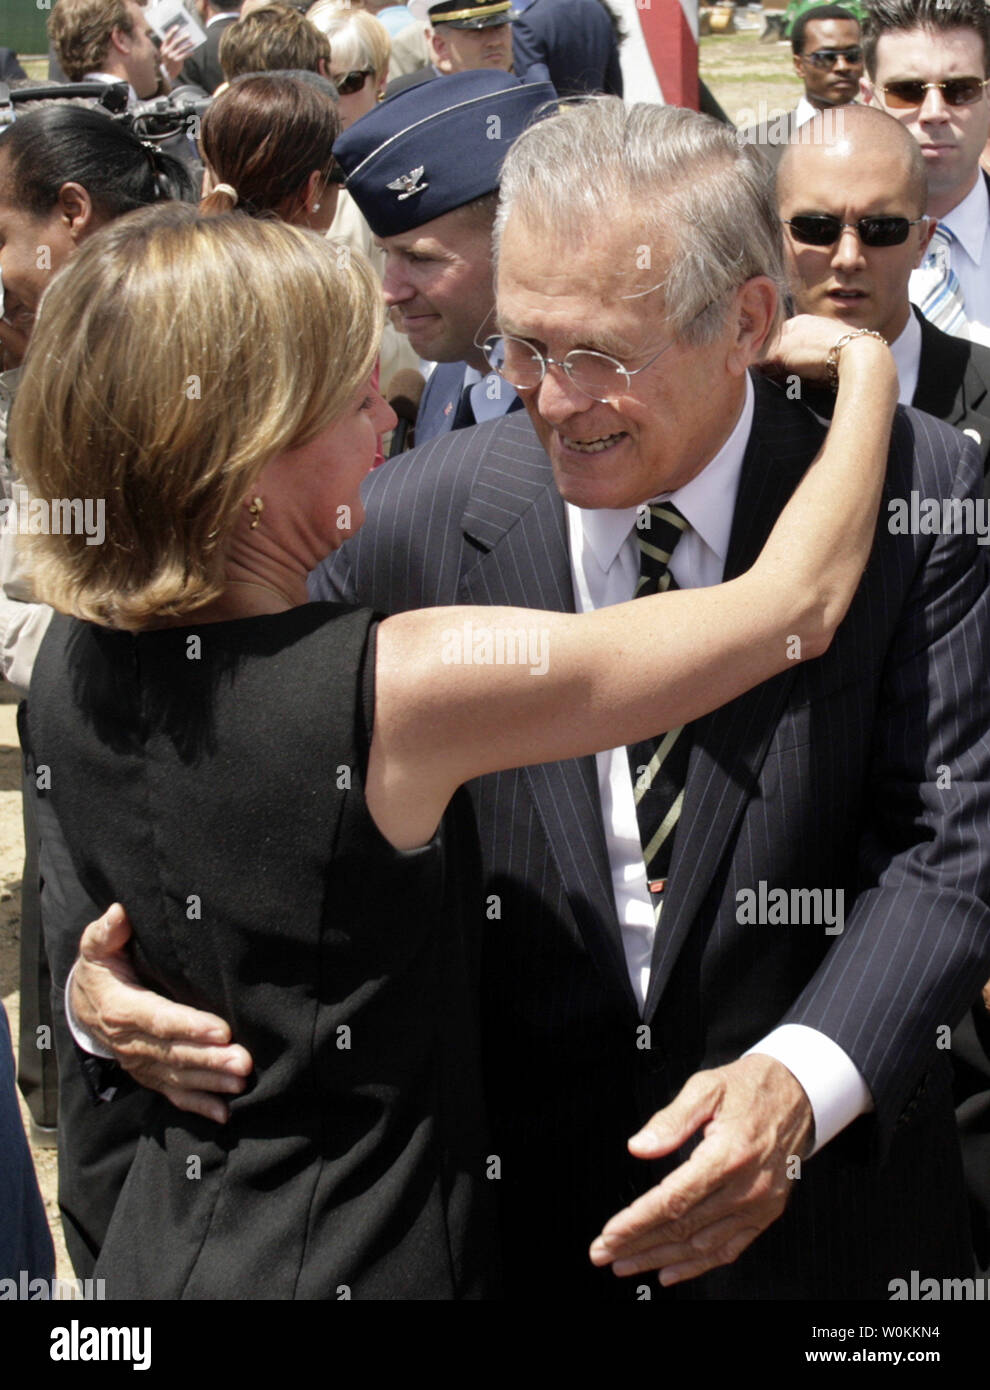 U.S. Defense Secretary Donald H. Rumsfeld (R) hugs with family member of victims who died in the September 11 attack on the Pentagon after a Memorial ground-breaking ceremony on June 15, 2006. The Pentagon Memorial will commemorate the 184 innocent lives lost in the Pentagon and on American Airlines Flight 77 on September 11, 2001. (UPI Photo/Yuri Gripas) Stock Photo